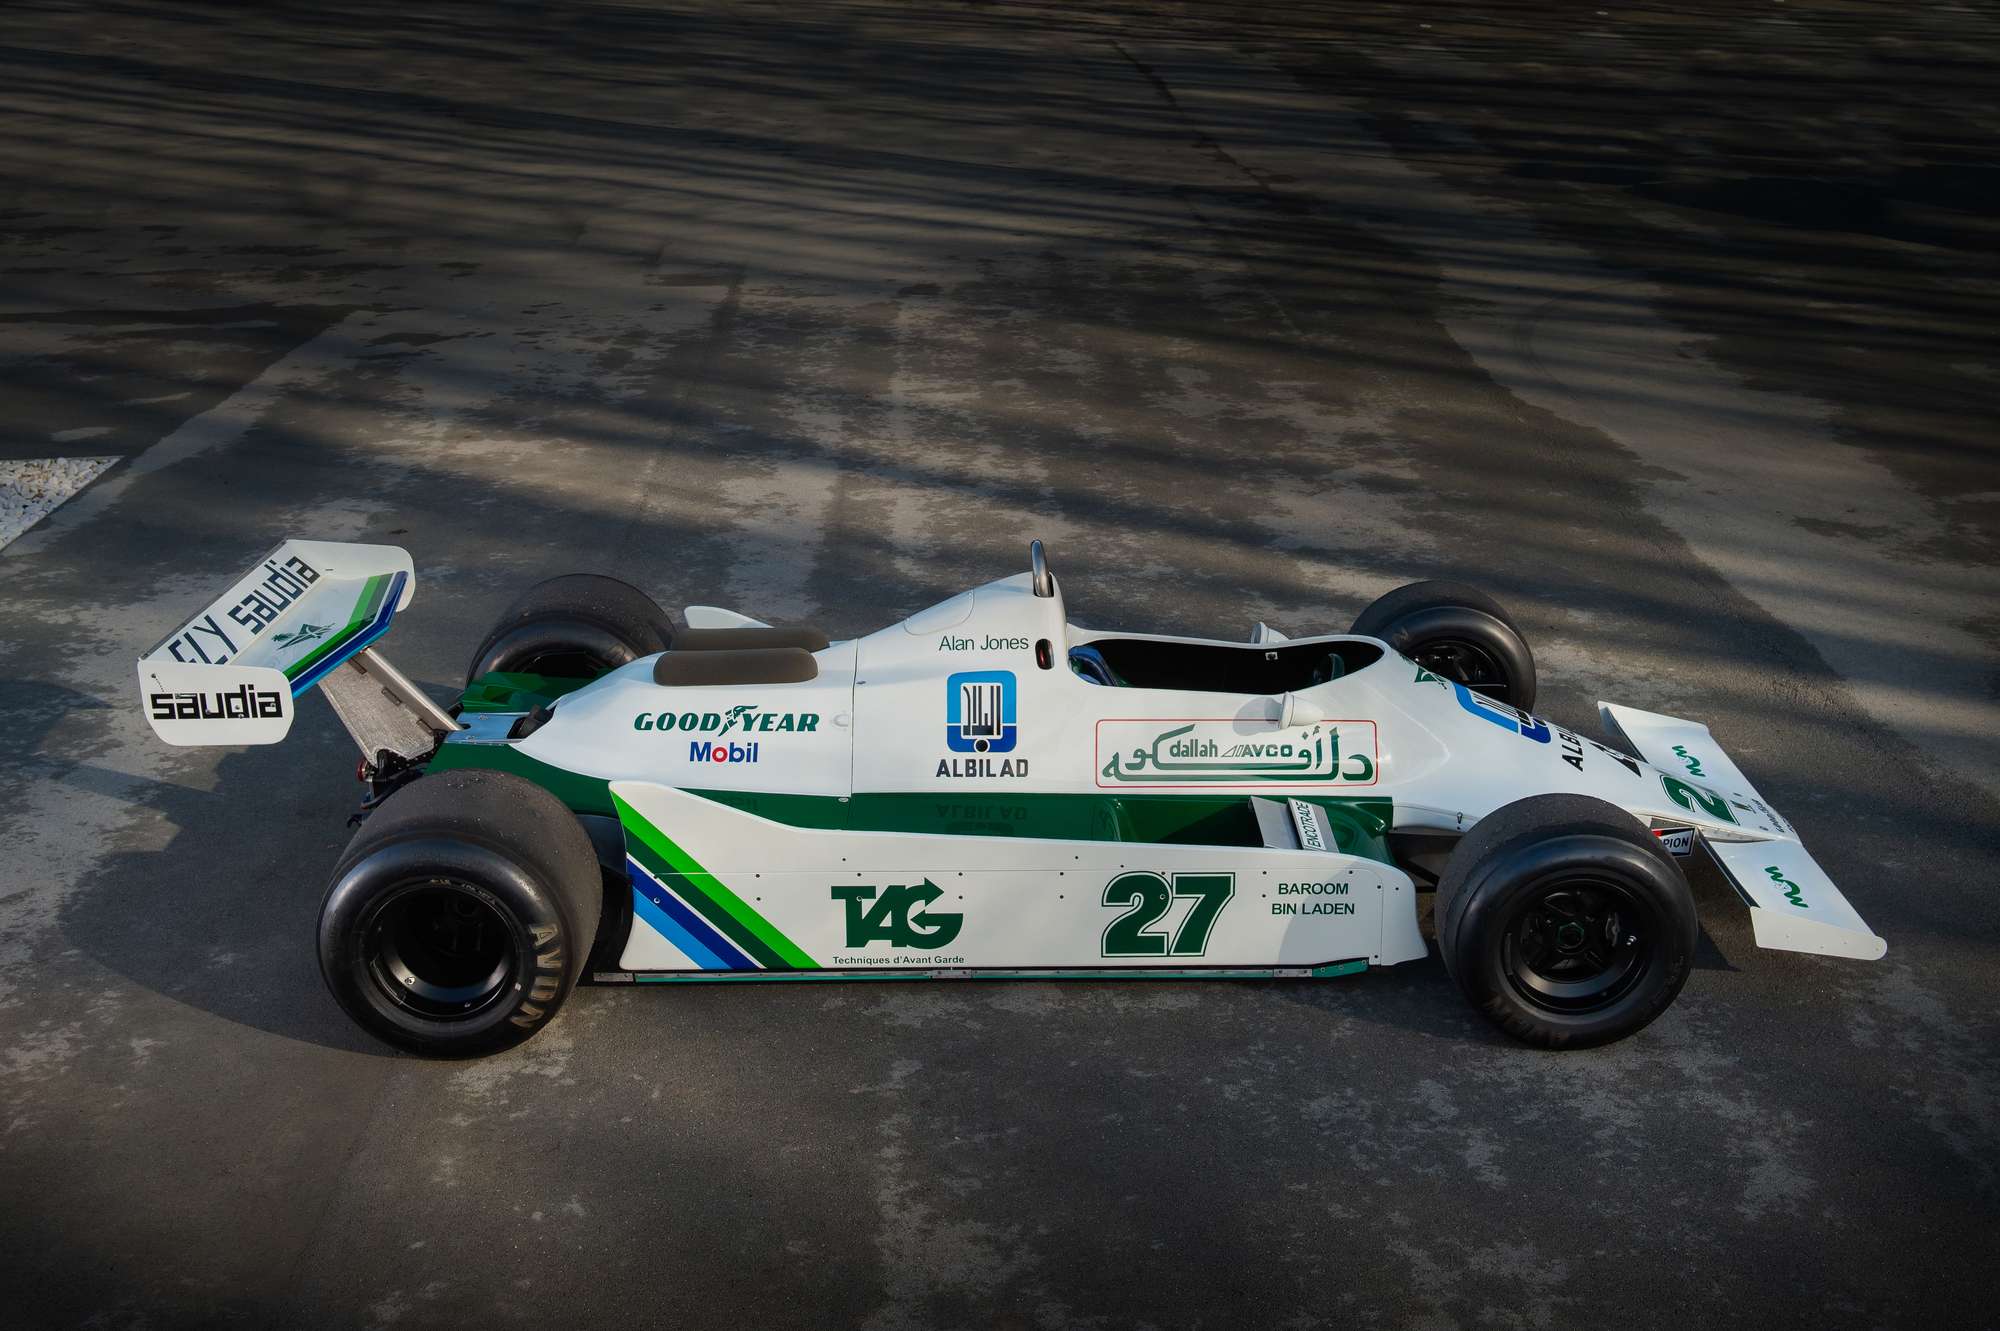 1979 Williams-Ford FW07 - chassis 01 - the first ever pole for 